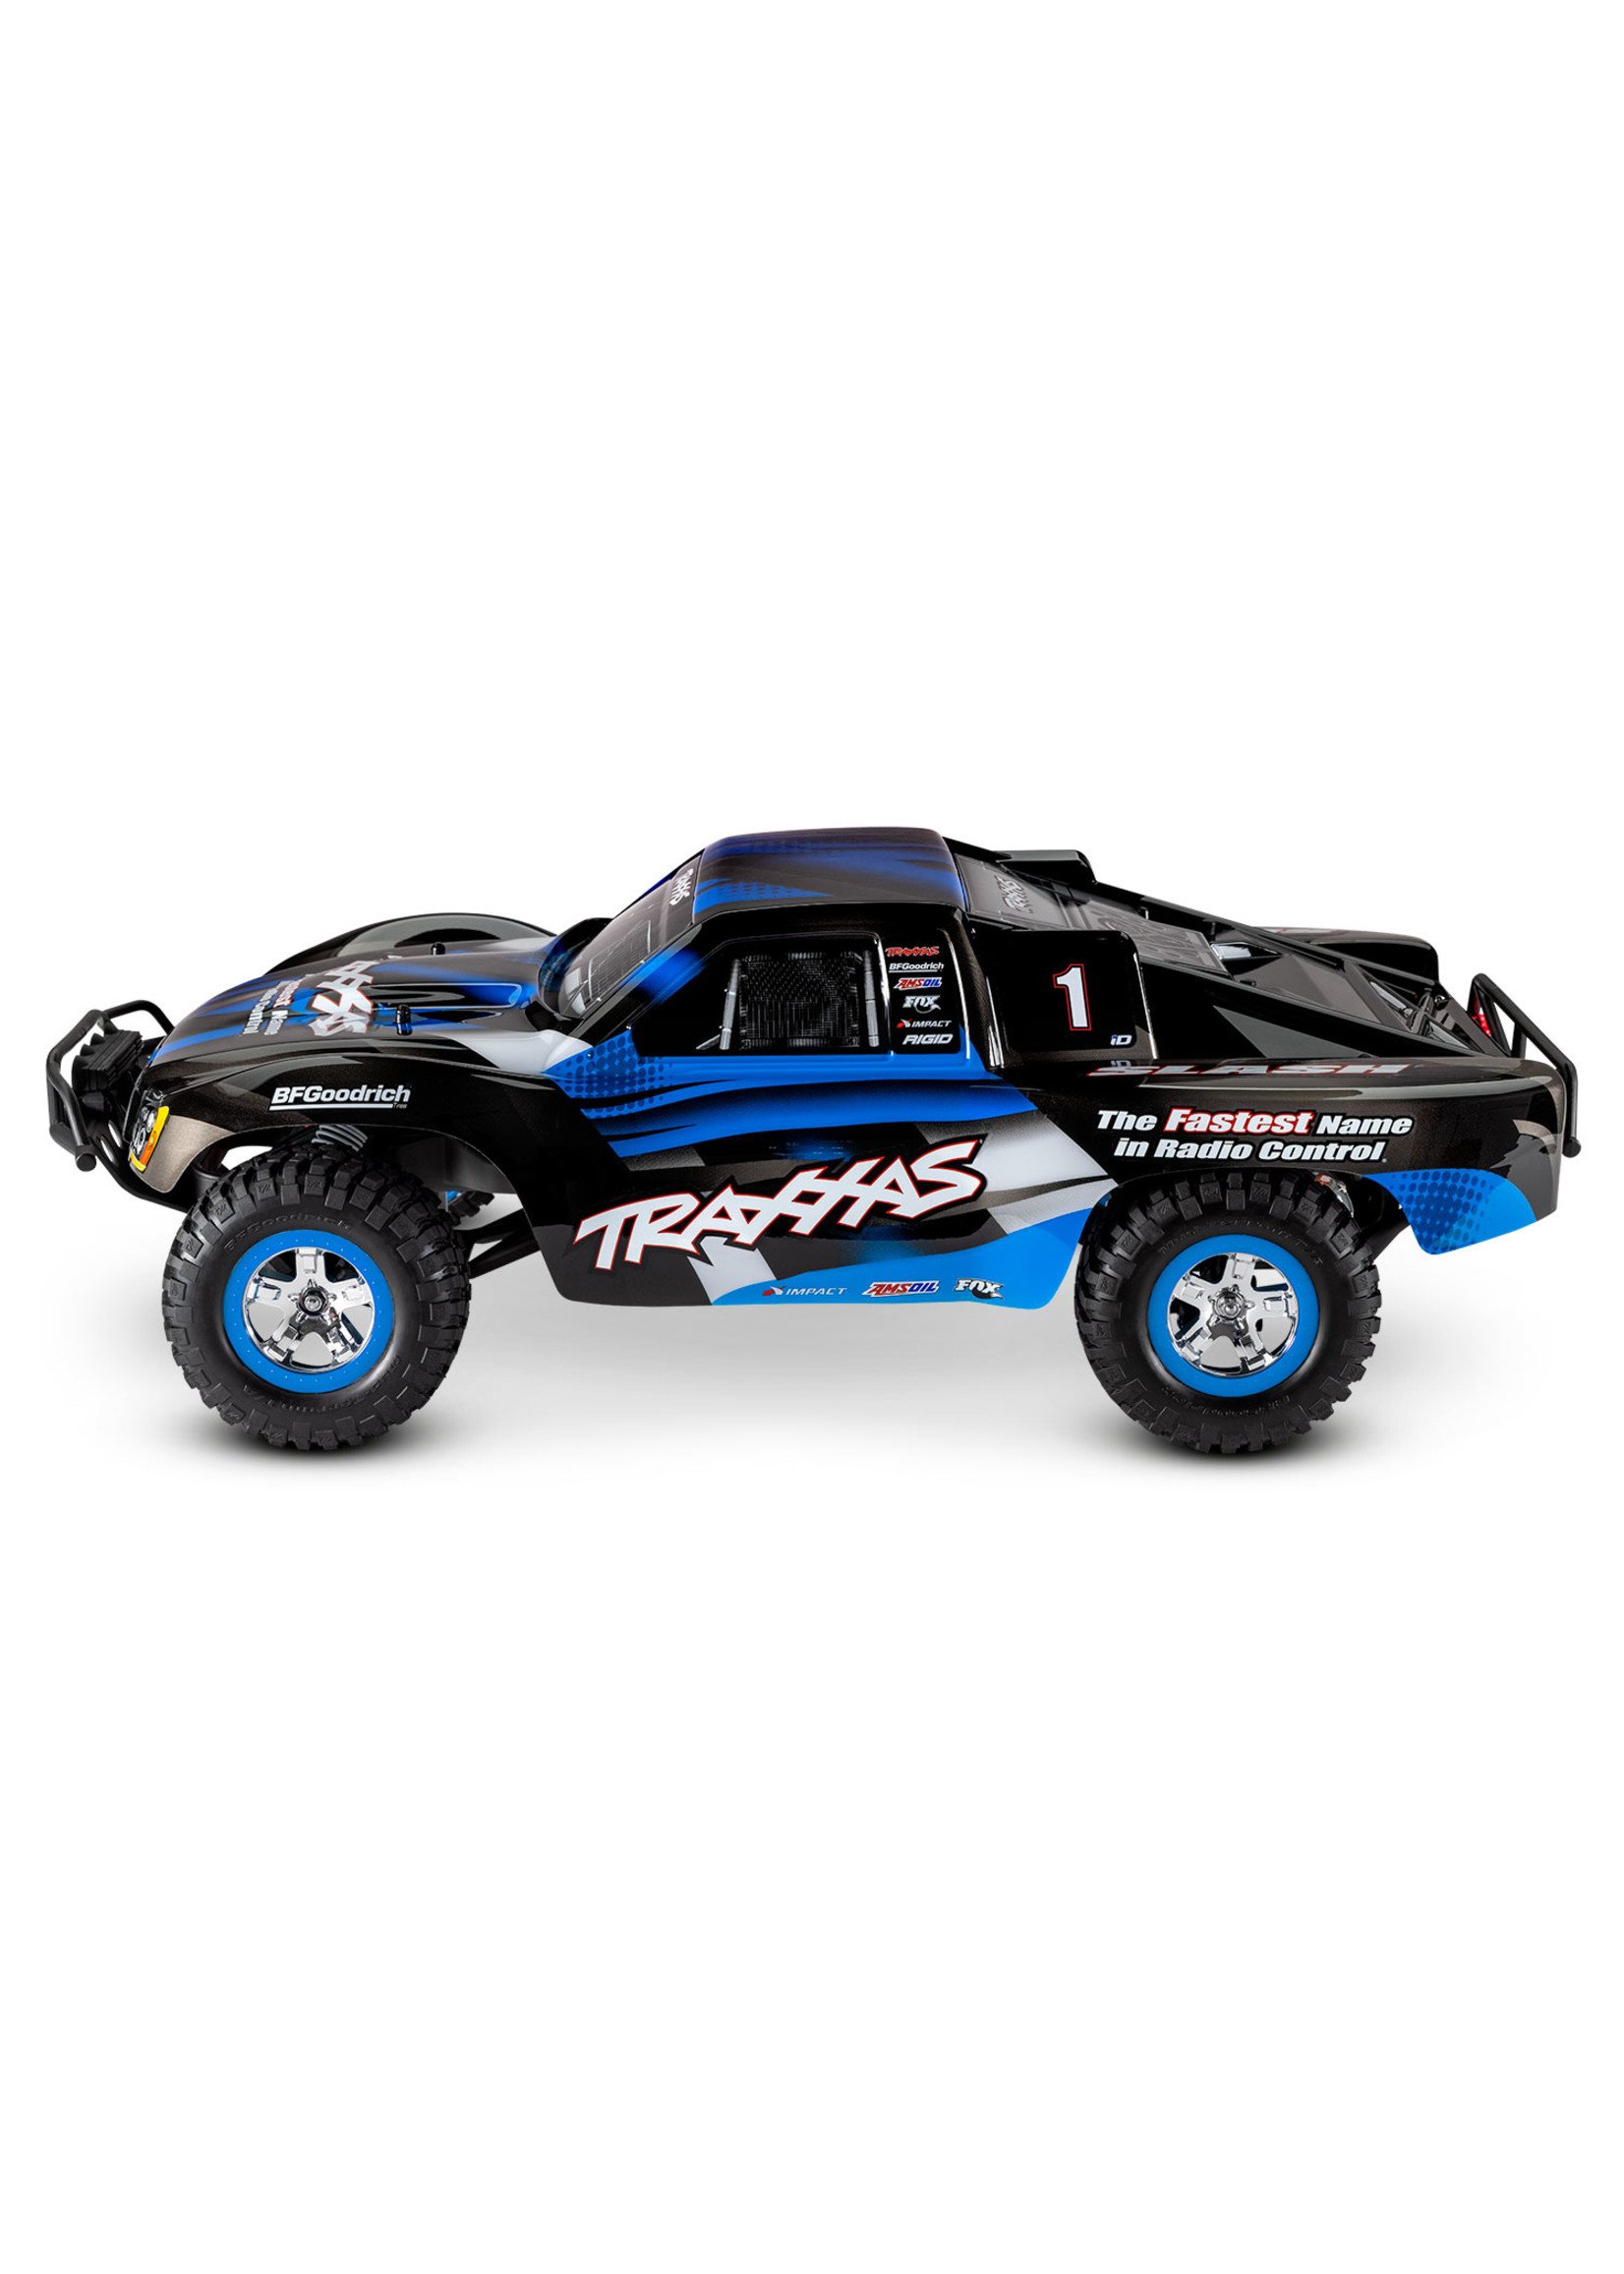 Traxxas 1/10 Slash 2WD RTR Short-Course Race Truck with Lights - Blue